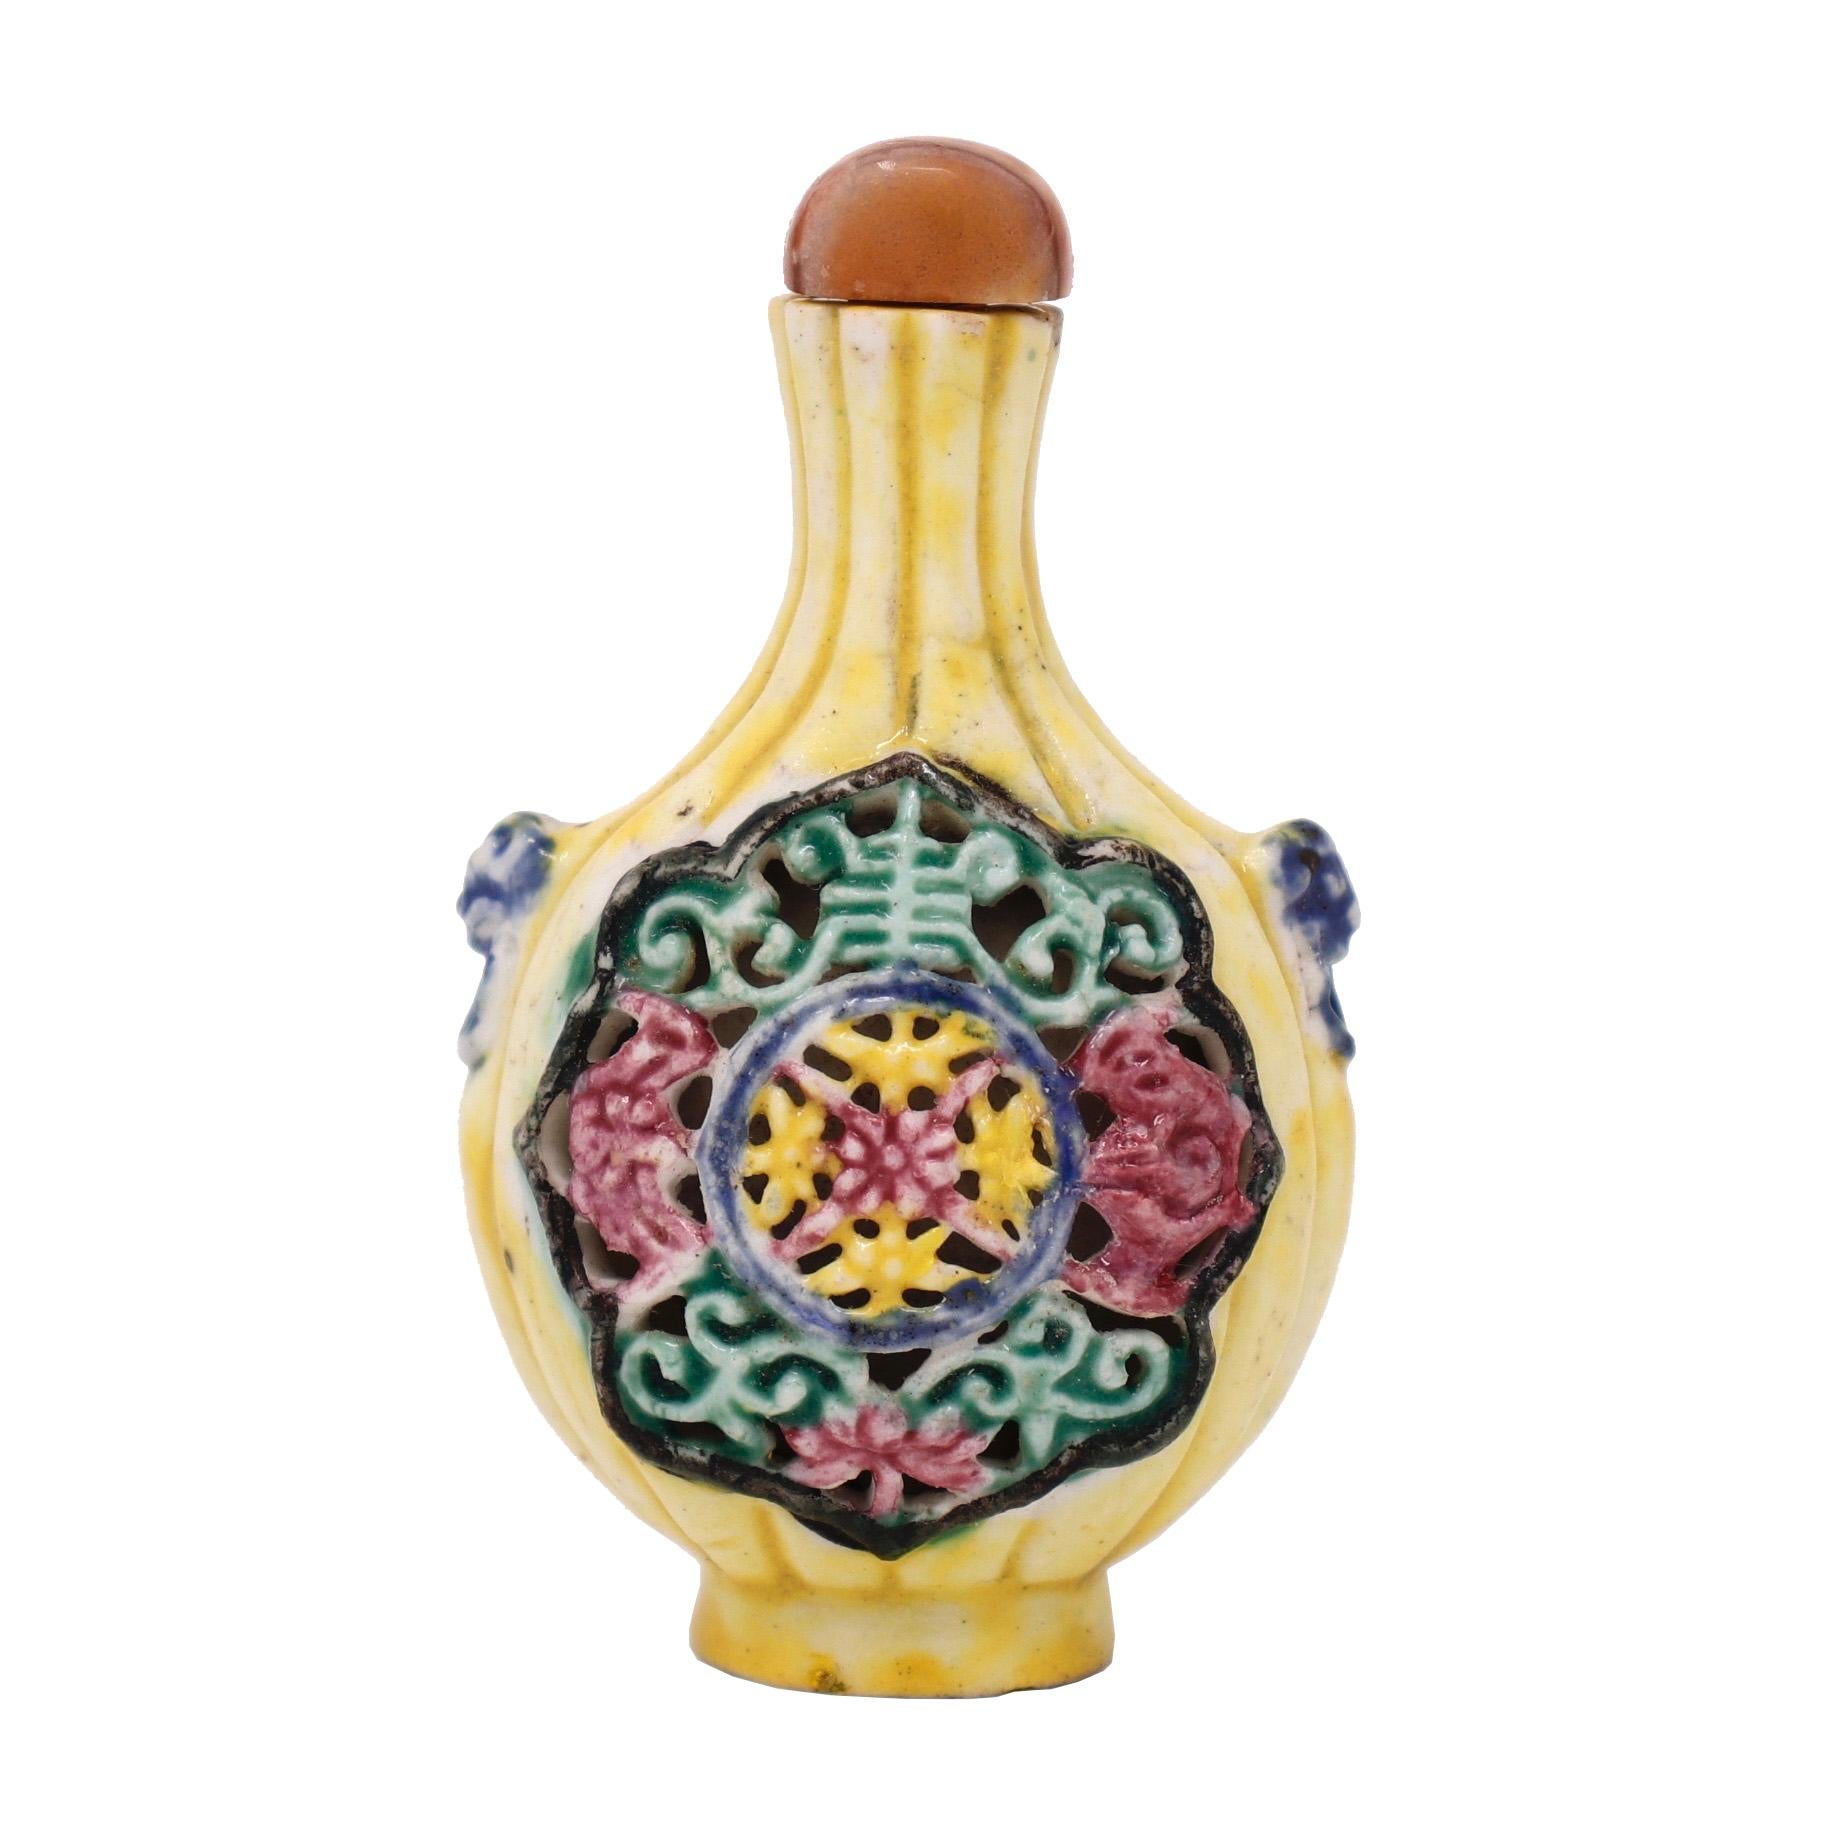 Qing Antique Chinese Reticulated Soft Paste Porcelain Snuff Bottle